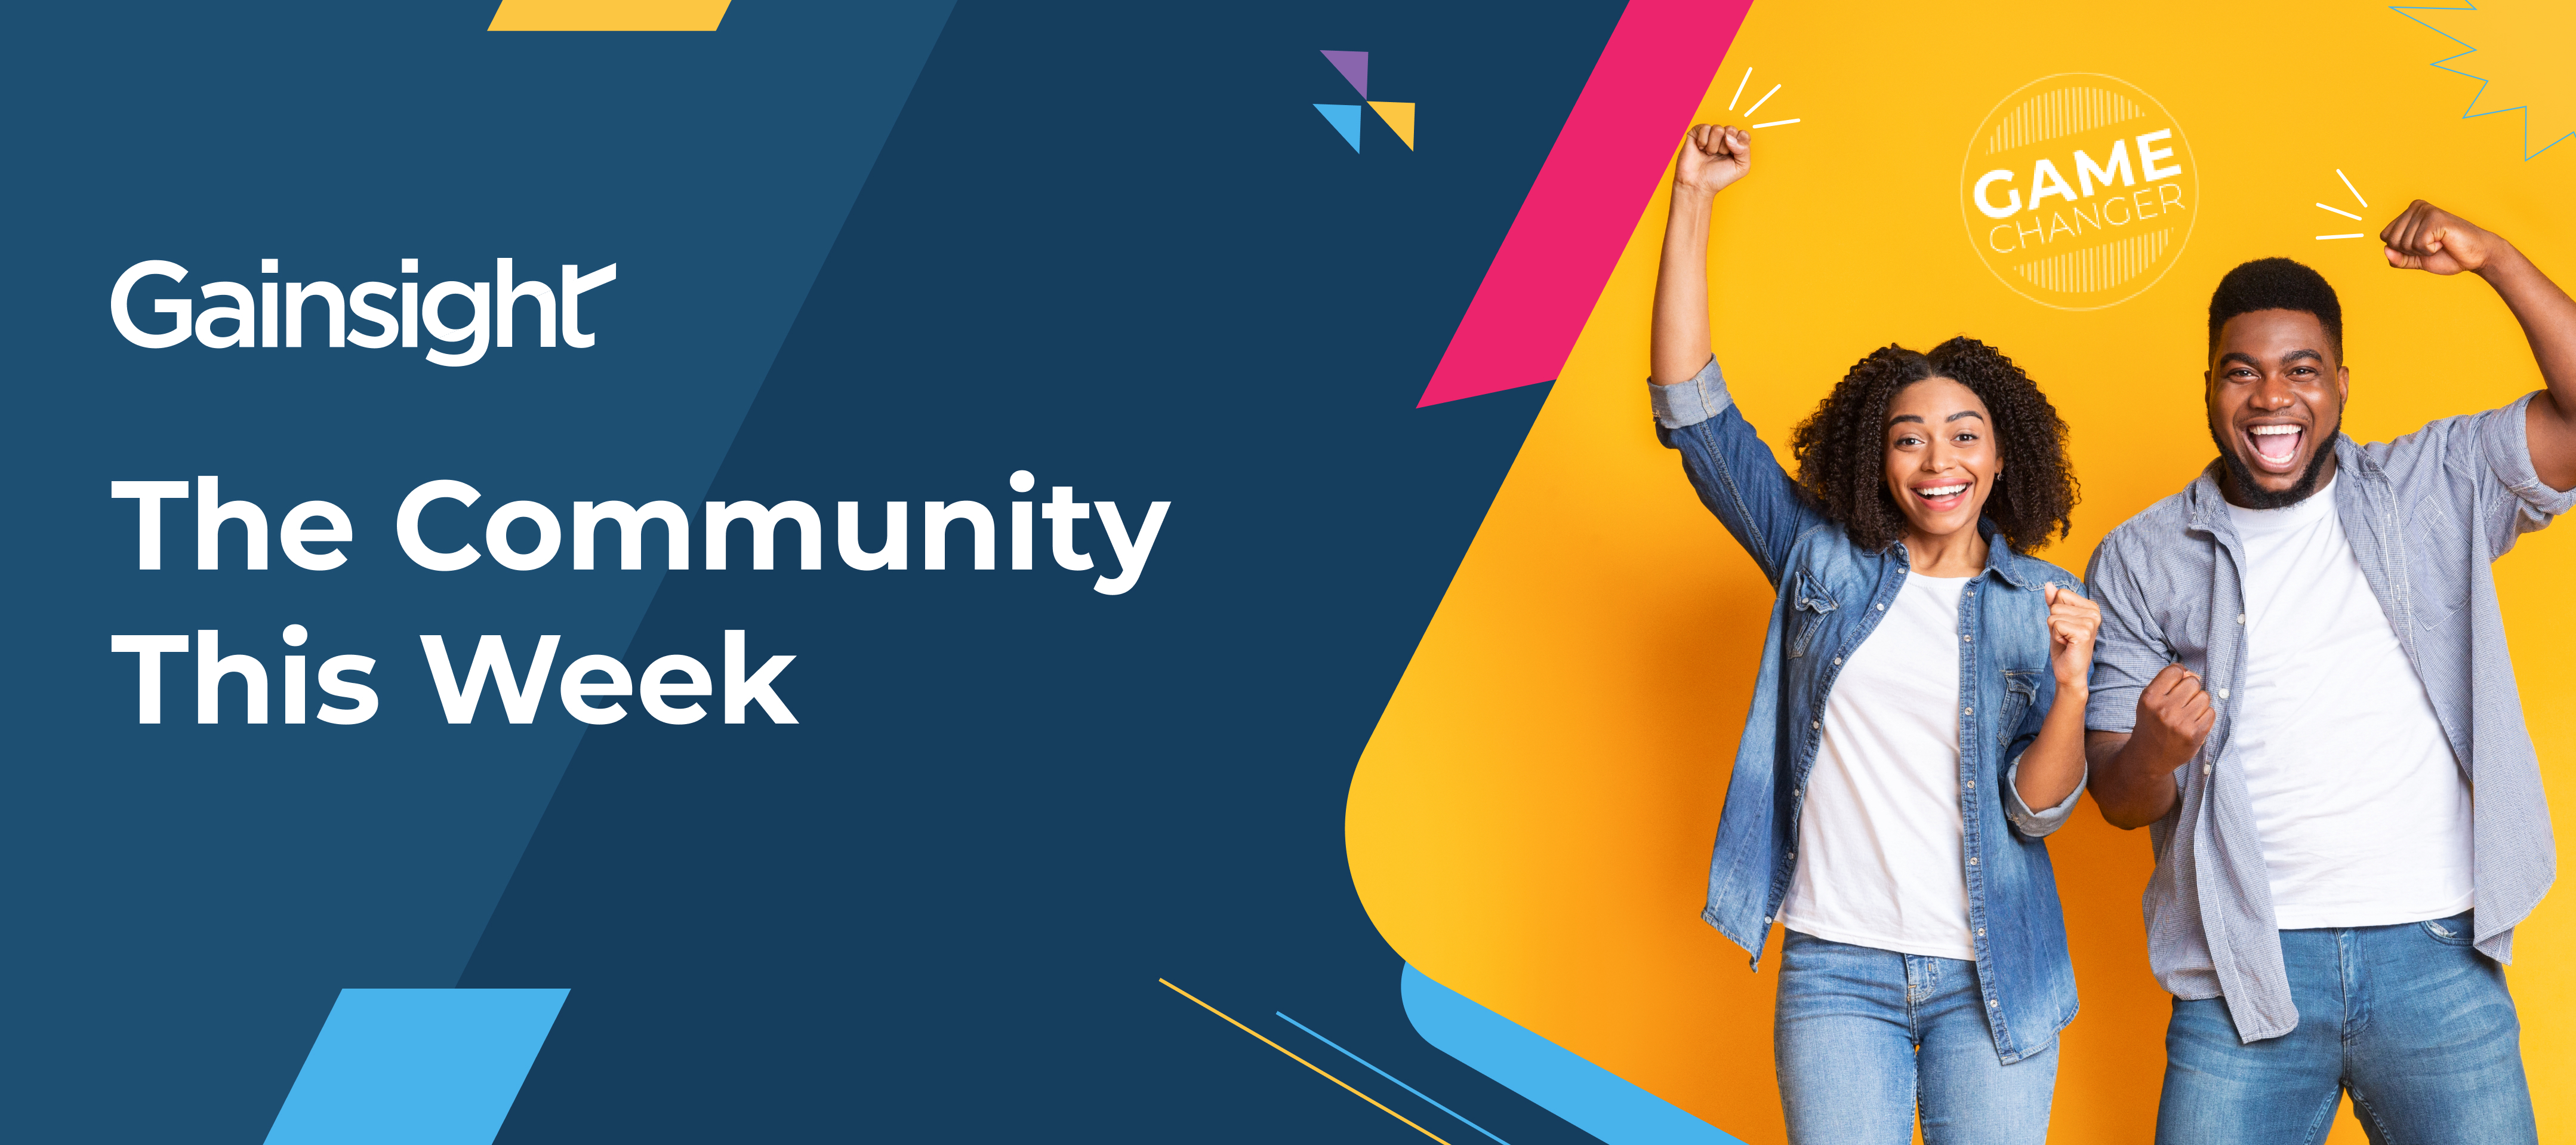 The Community This Week: Community Bytes from the Community Builders